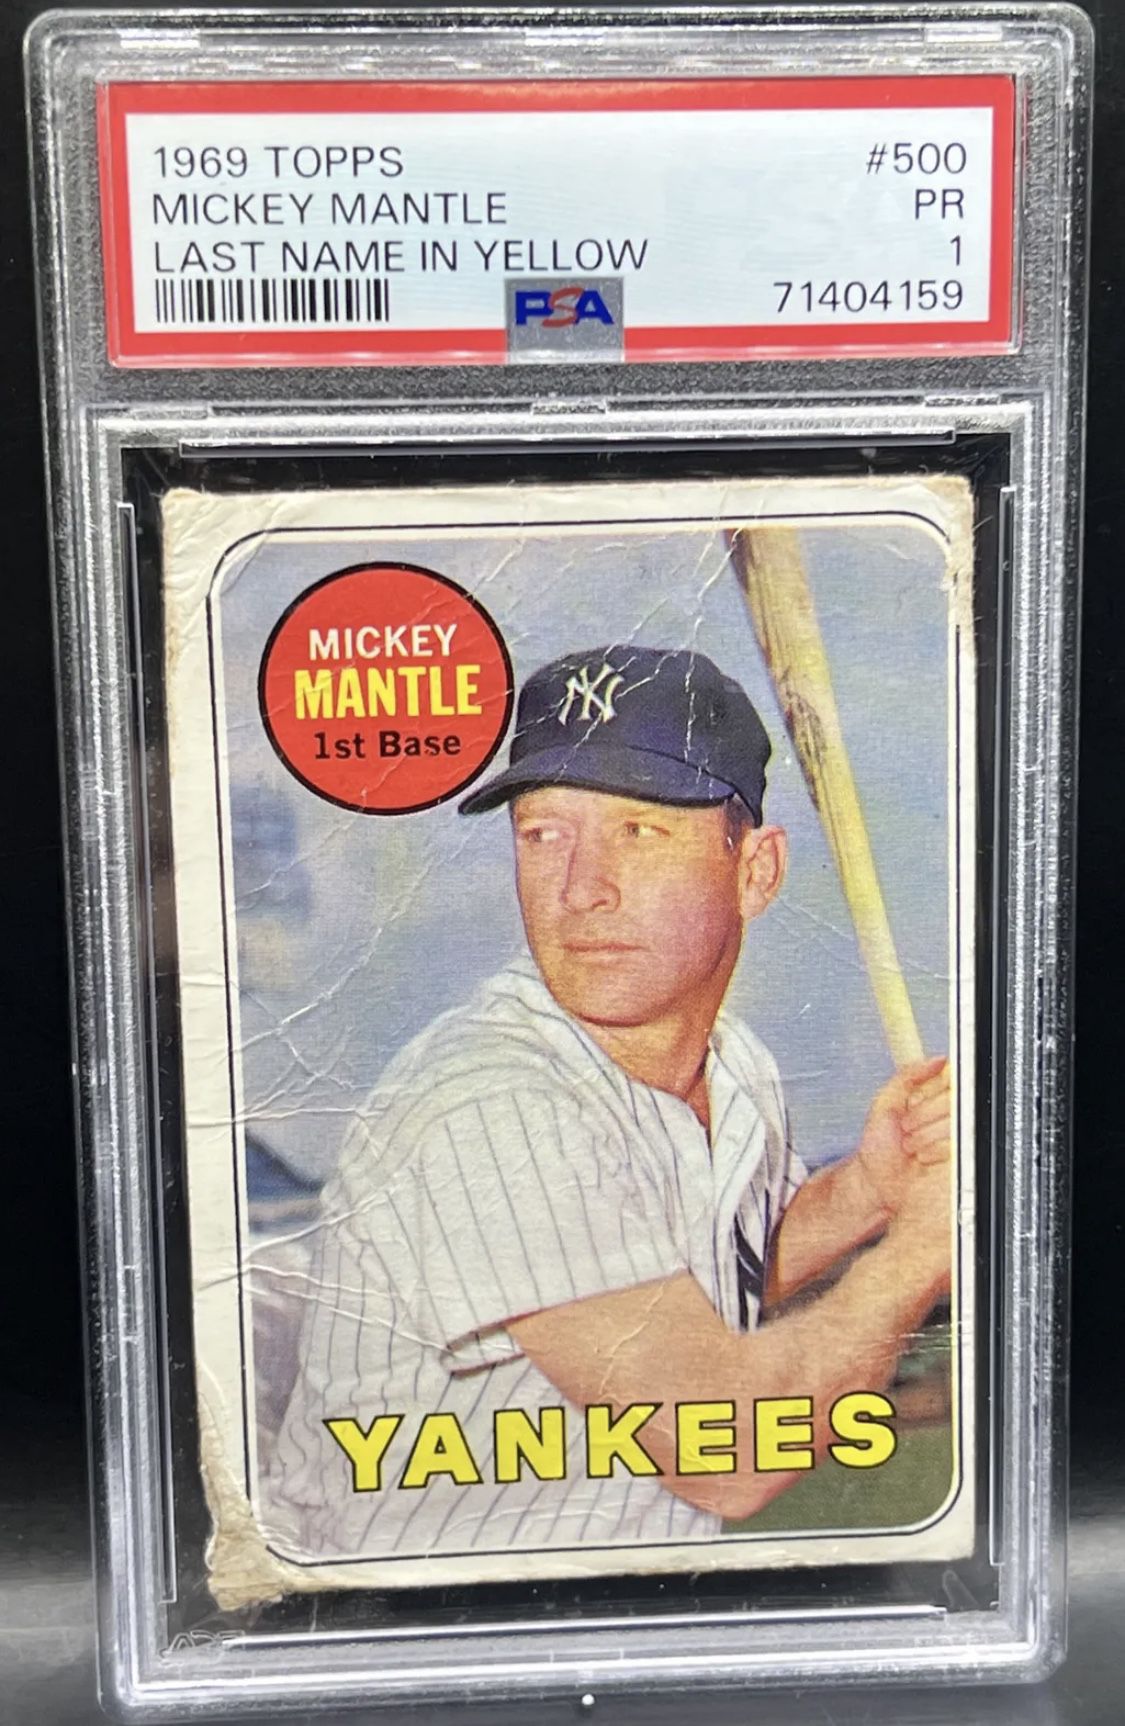 1969 Topps Mickey Mantle Last Name in Yellow PSA 1 Poor New York Yankees #500